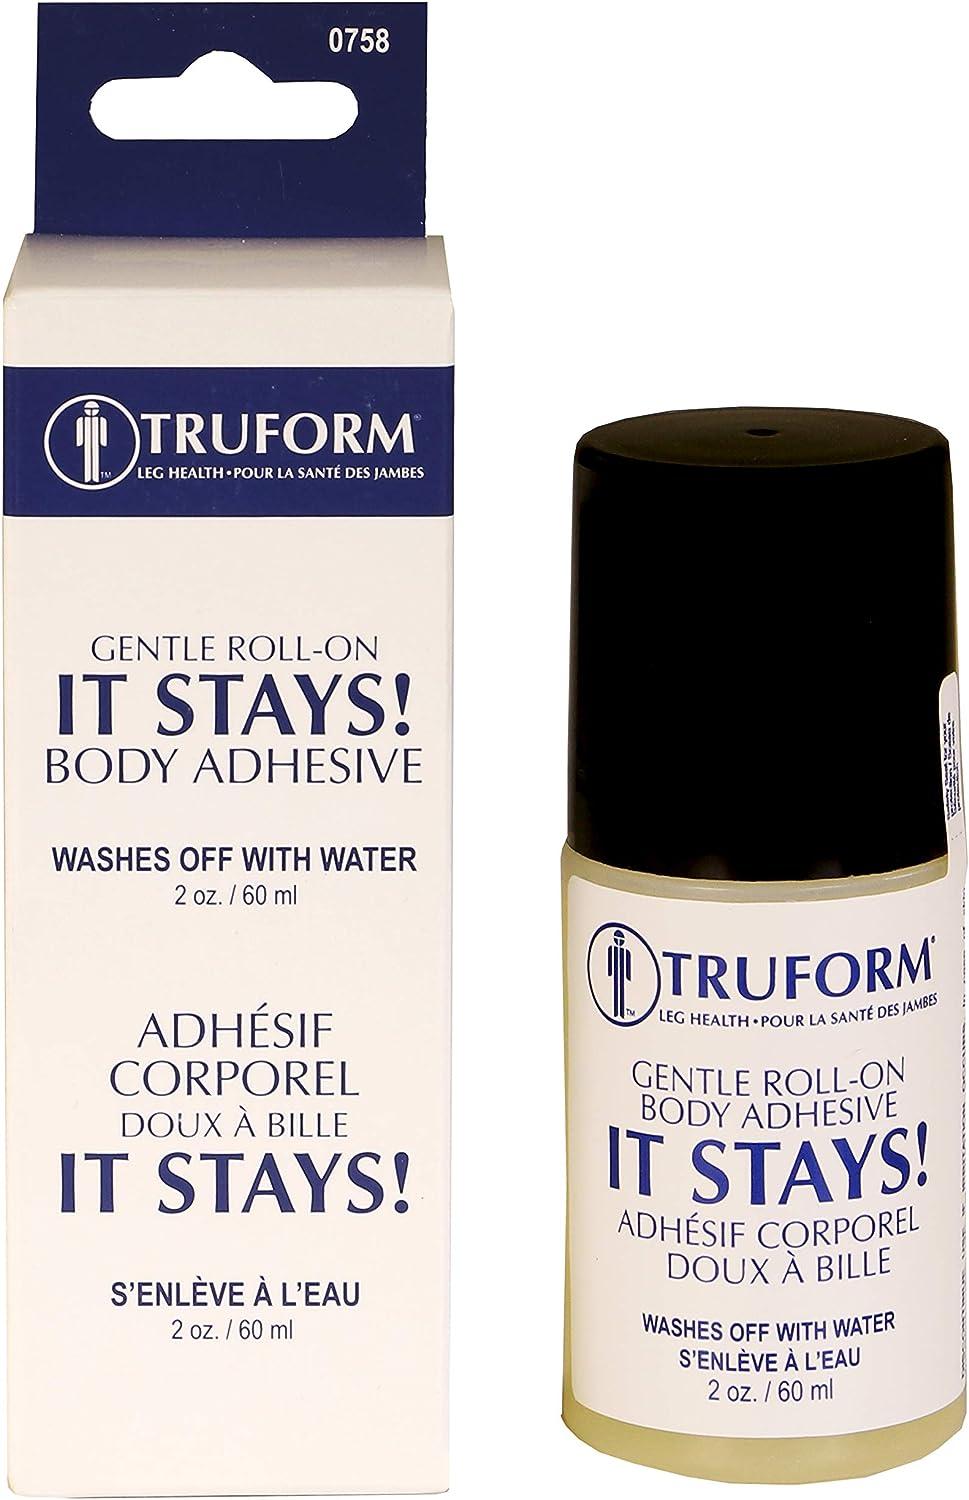 Truform Roll-on Body Adhesive Prevents Stocking Rolling or Falling